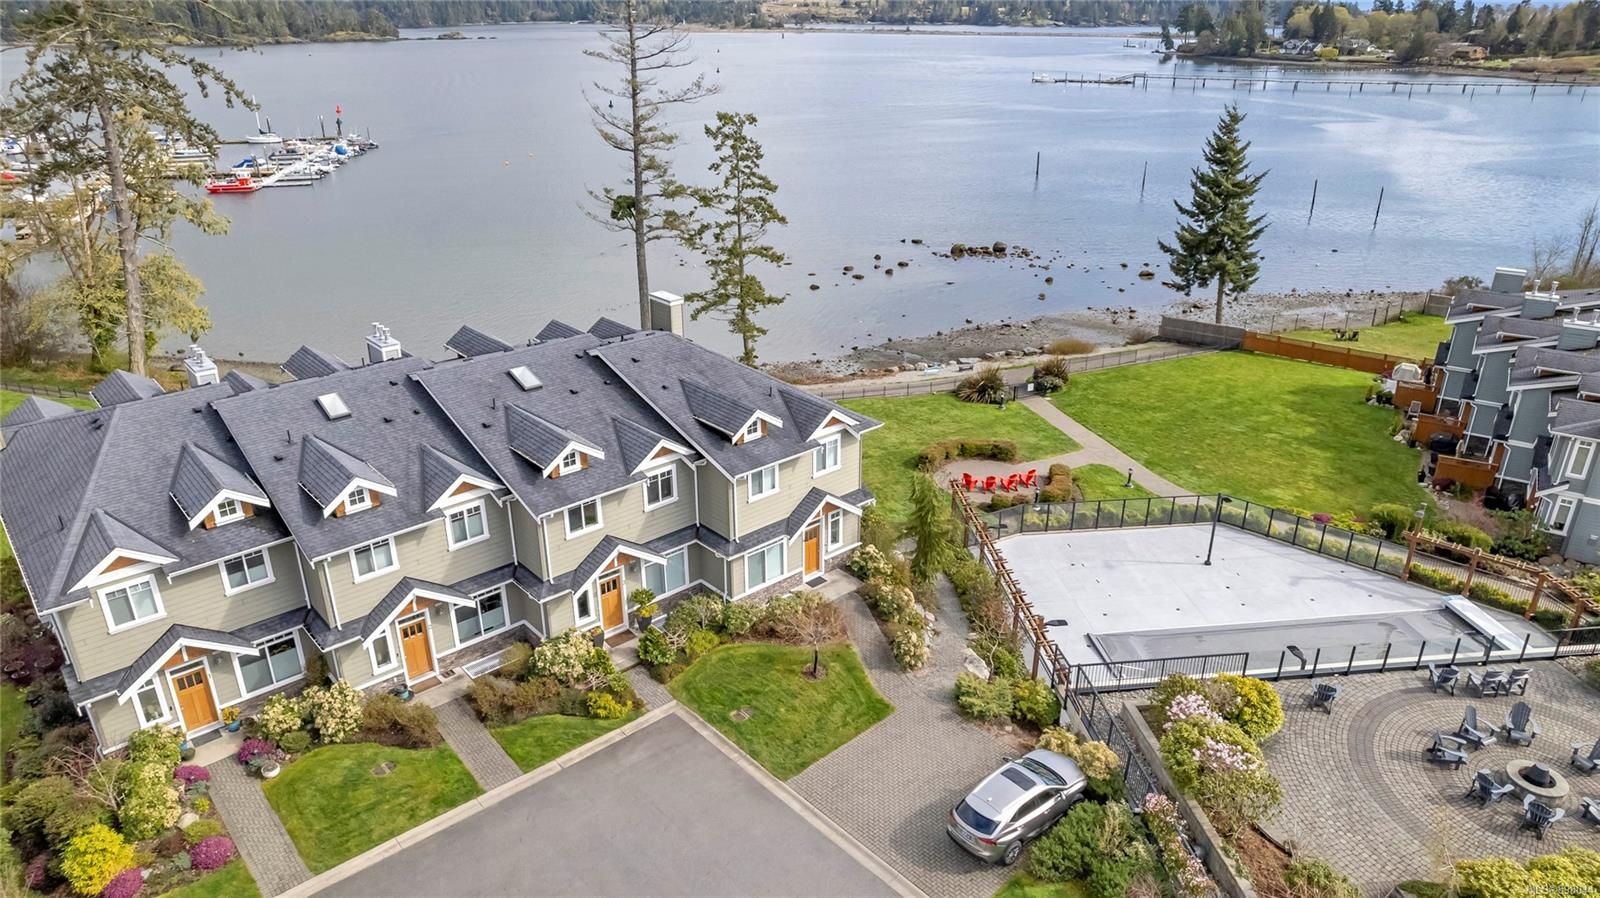 Open House. Open House on Saturday, August 20, 2022 12:00PM - 2:00PM
Stunning Oceanfront Sooke Townhouse in Heron View with 4 bedrooms and 4 bathrooms and all the amenities you can imagine. Open house this SATURDAY August 20th, 12 pm to 2pm. $1,199,000.00